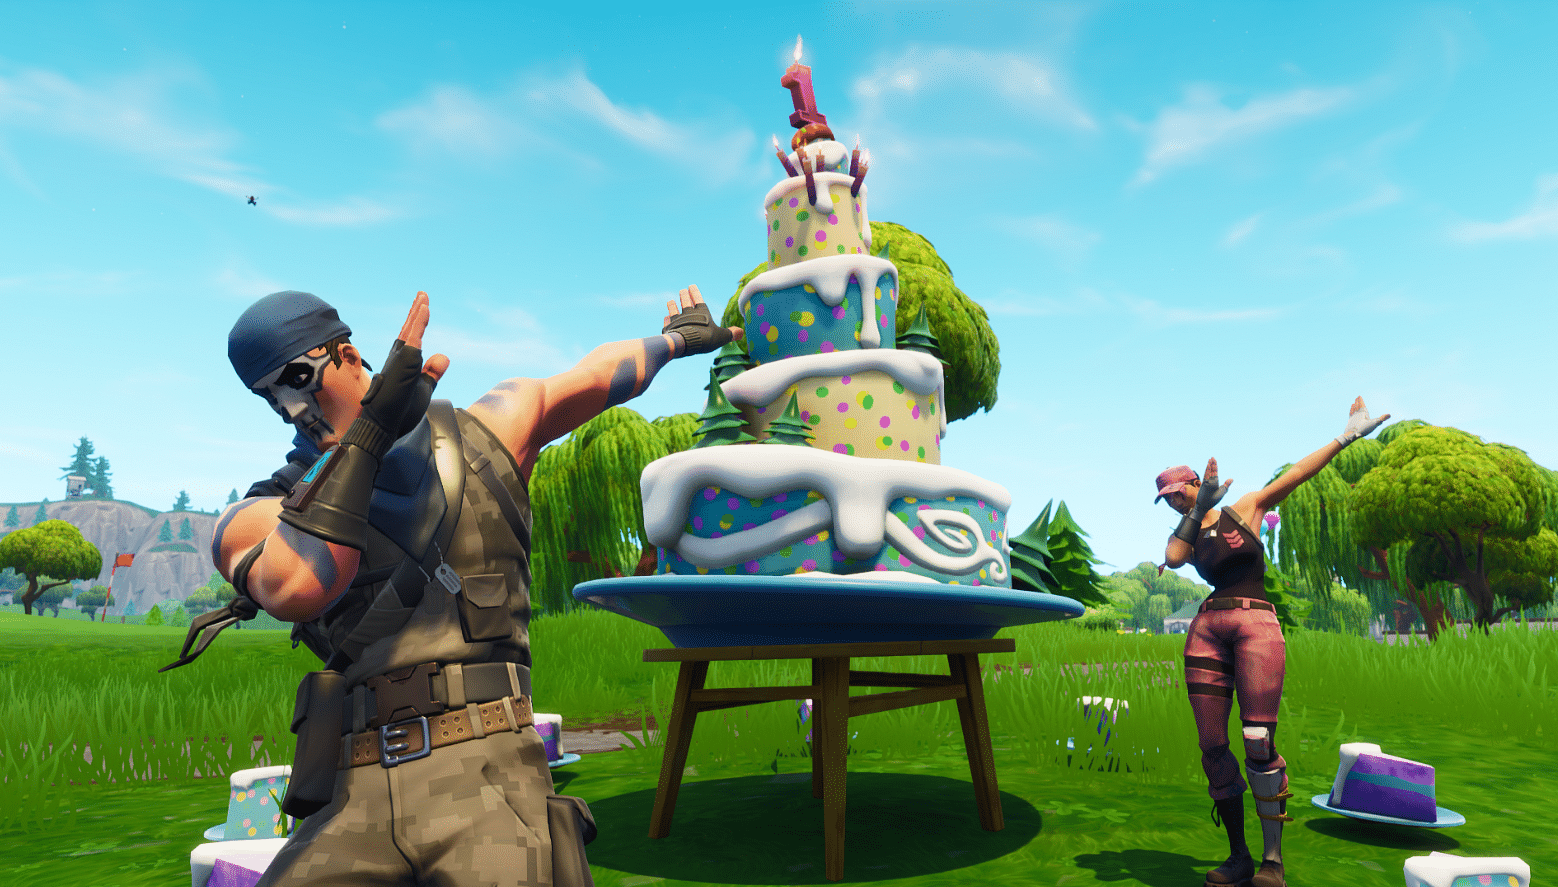 Where are the birthday cakes in Fortnite?